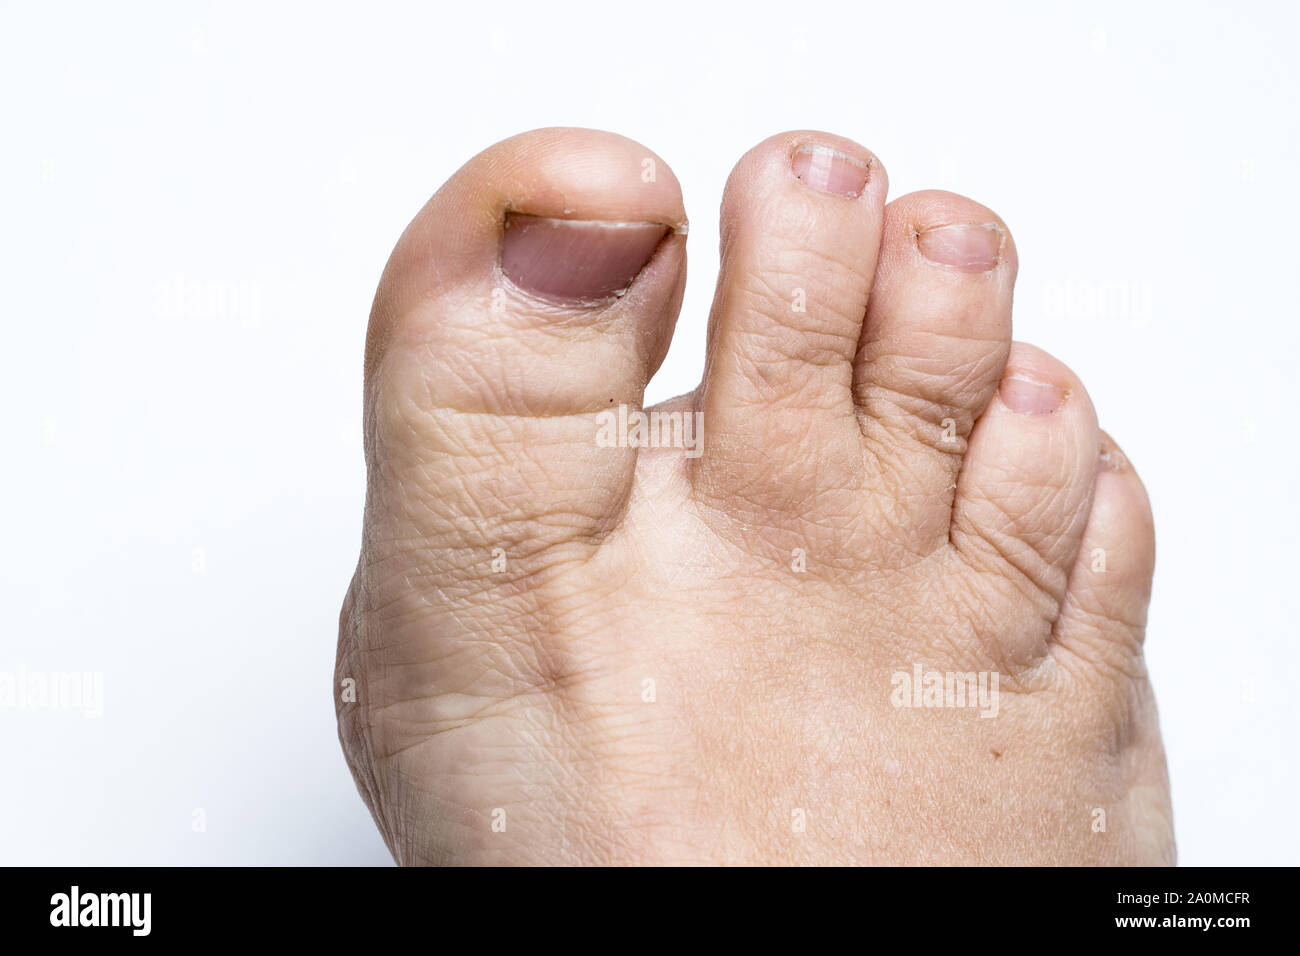 Ugly feet pics for sale